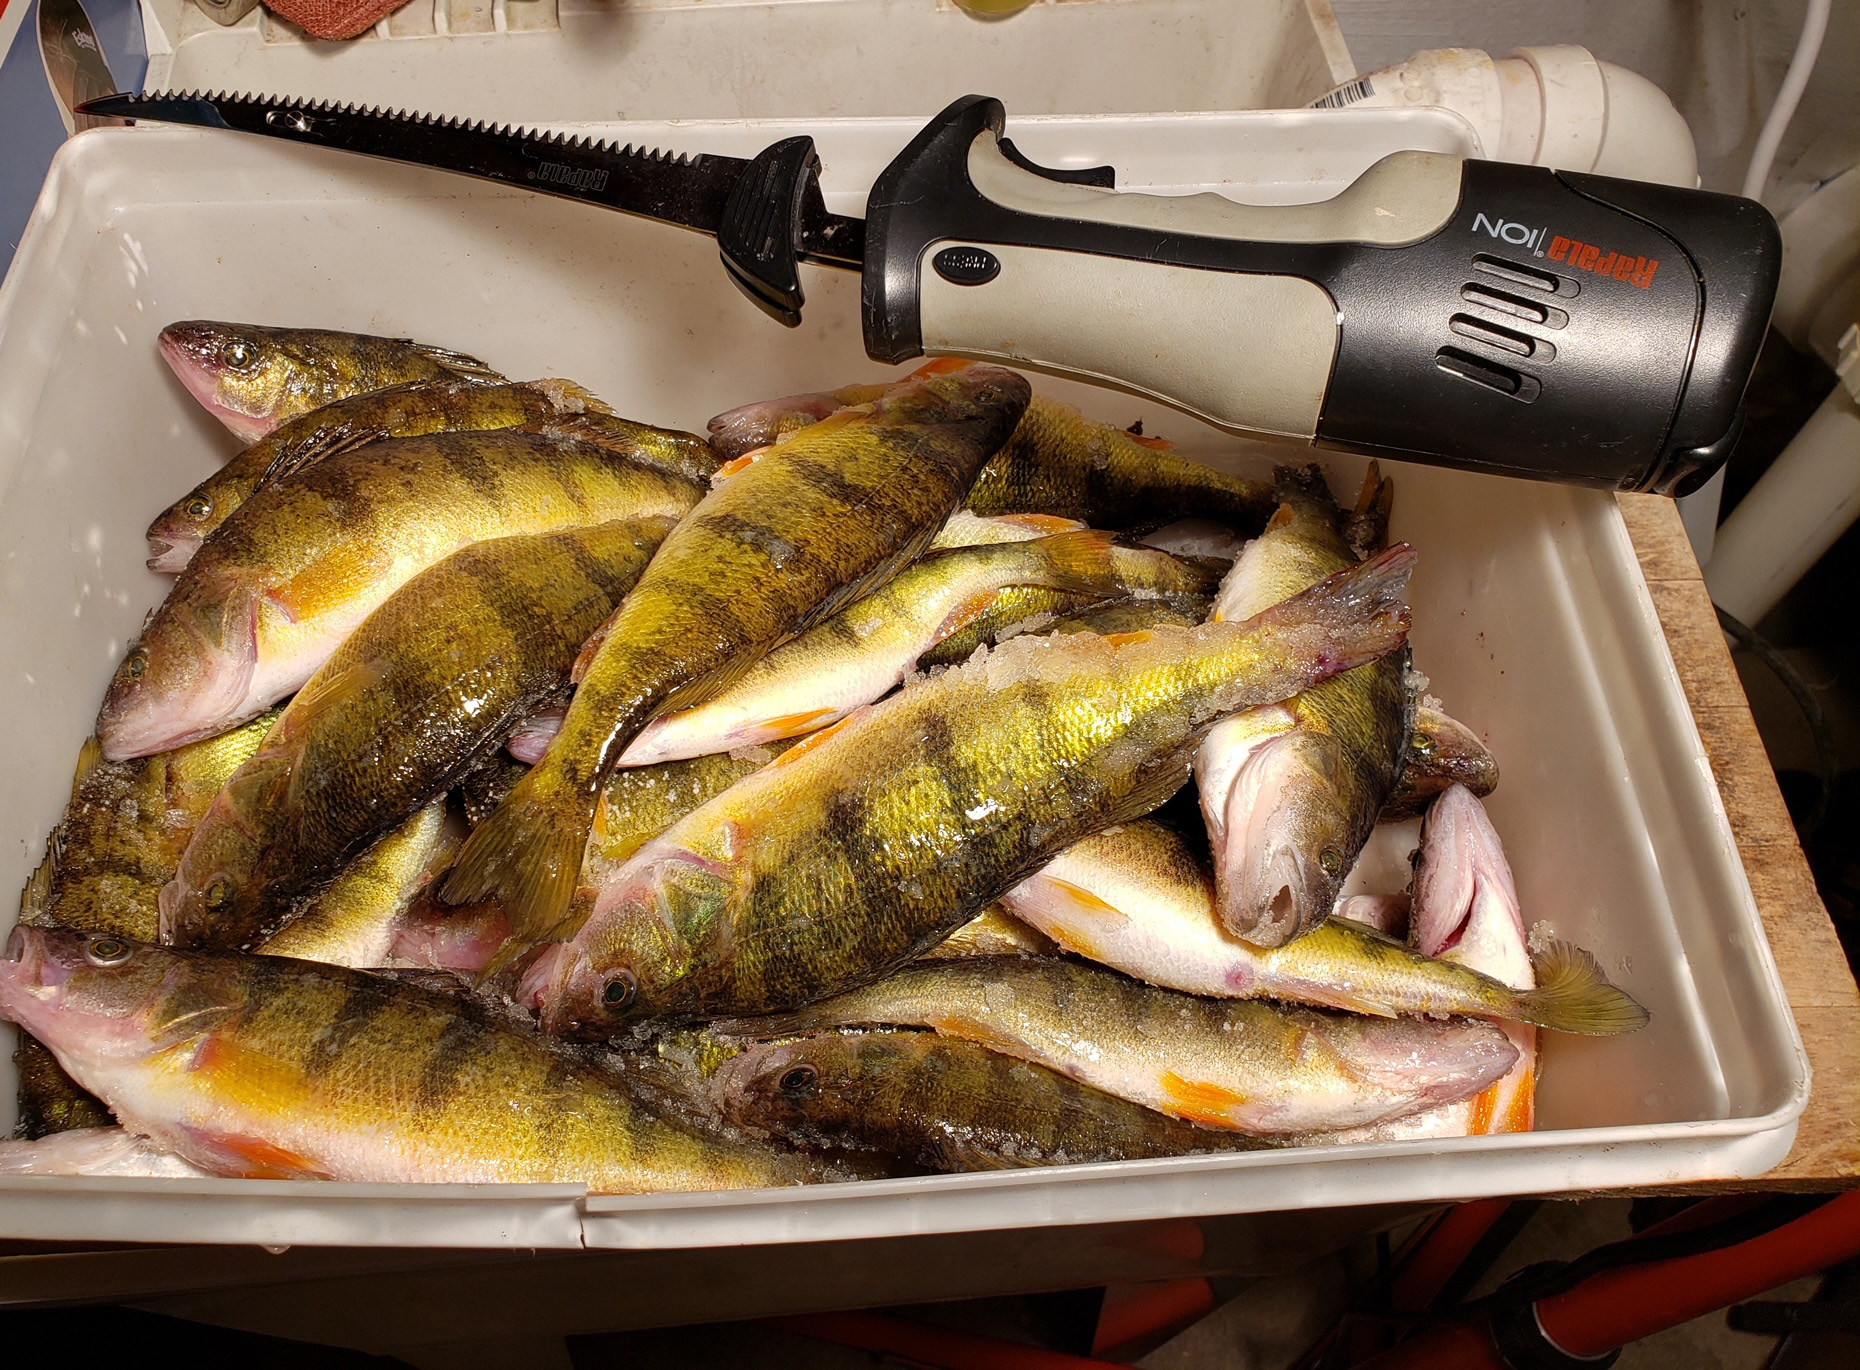 Quick Tips for Spring Perch Fishing in Ontario